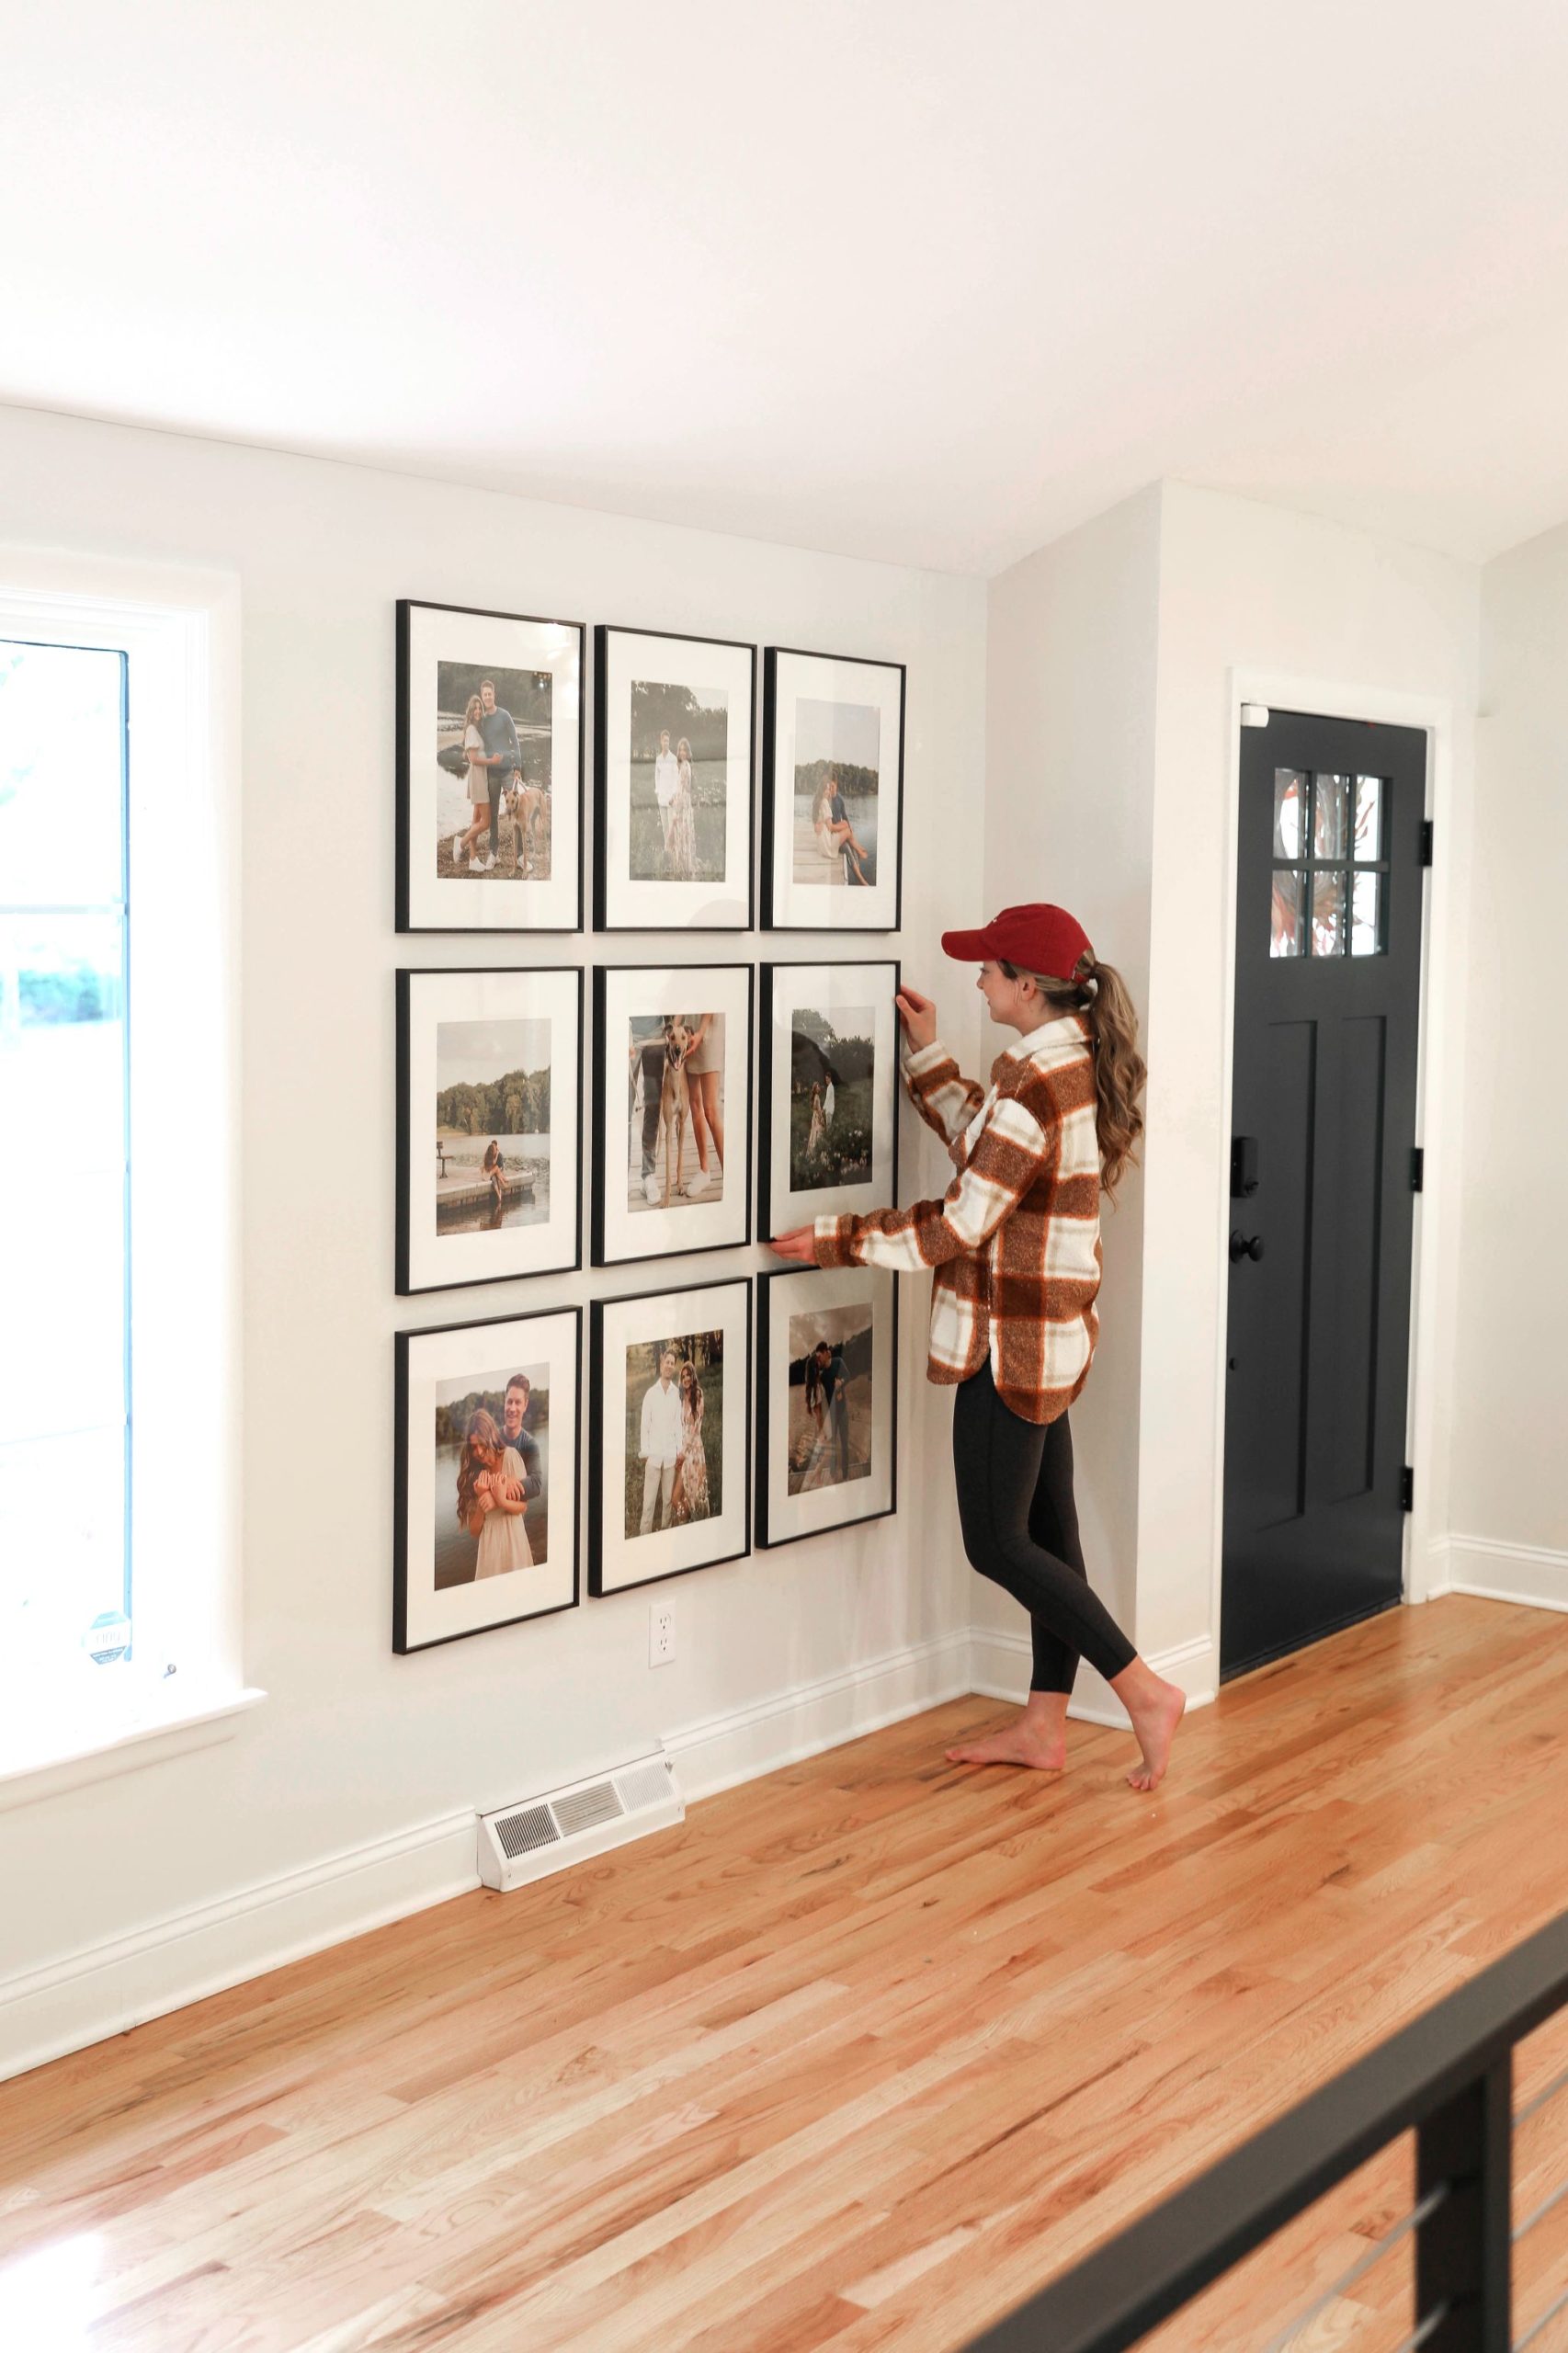 Gallery wall entryway daily dose of charm lauren emily lindmark